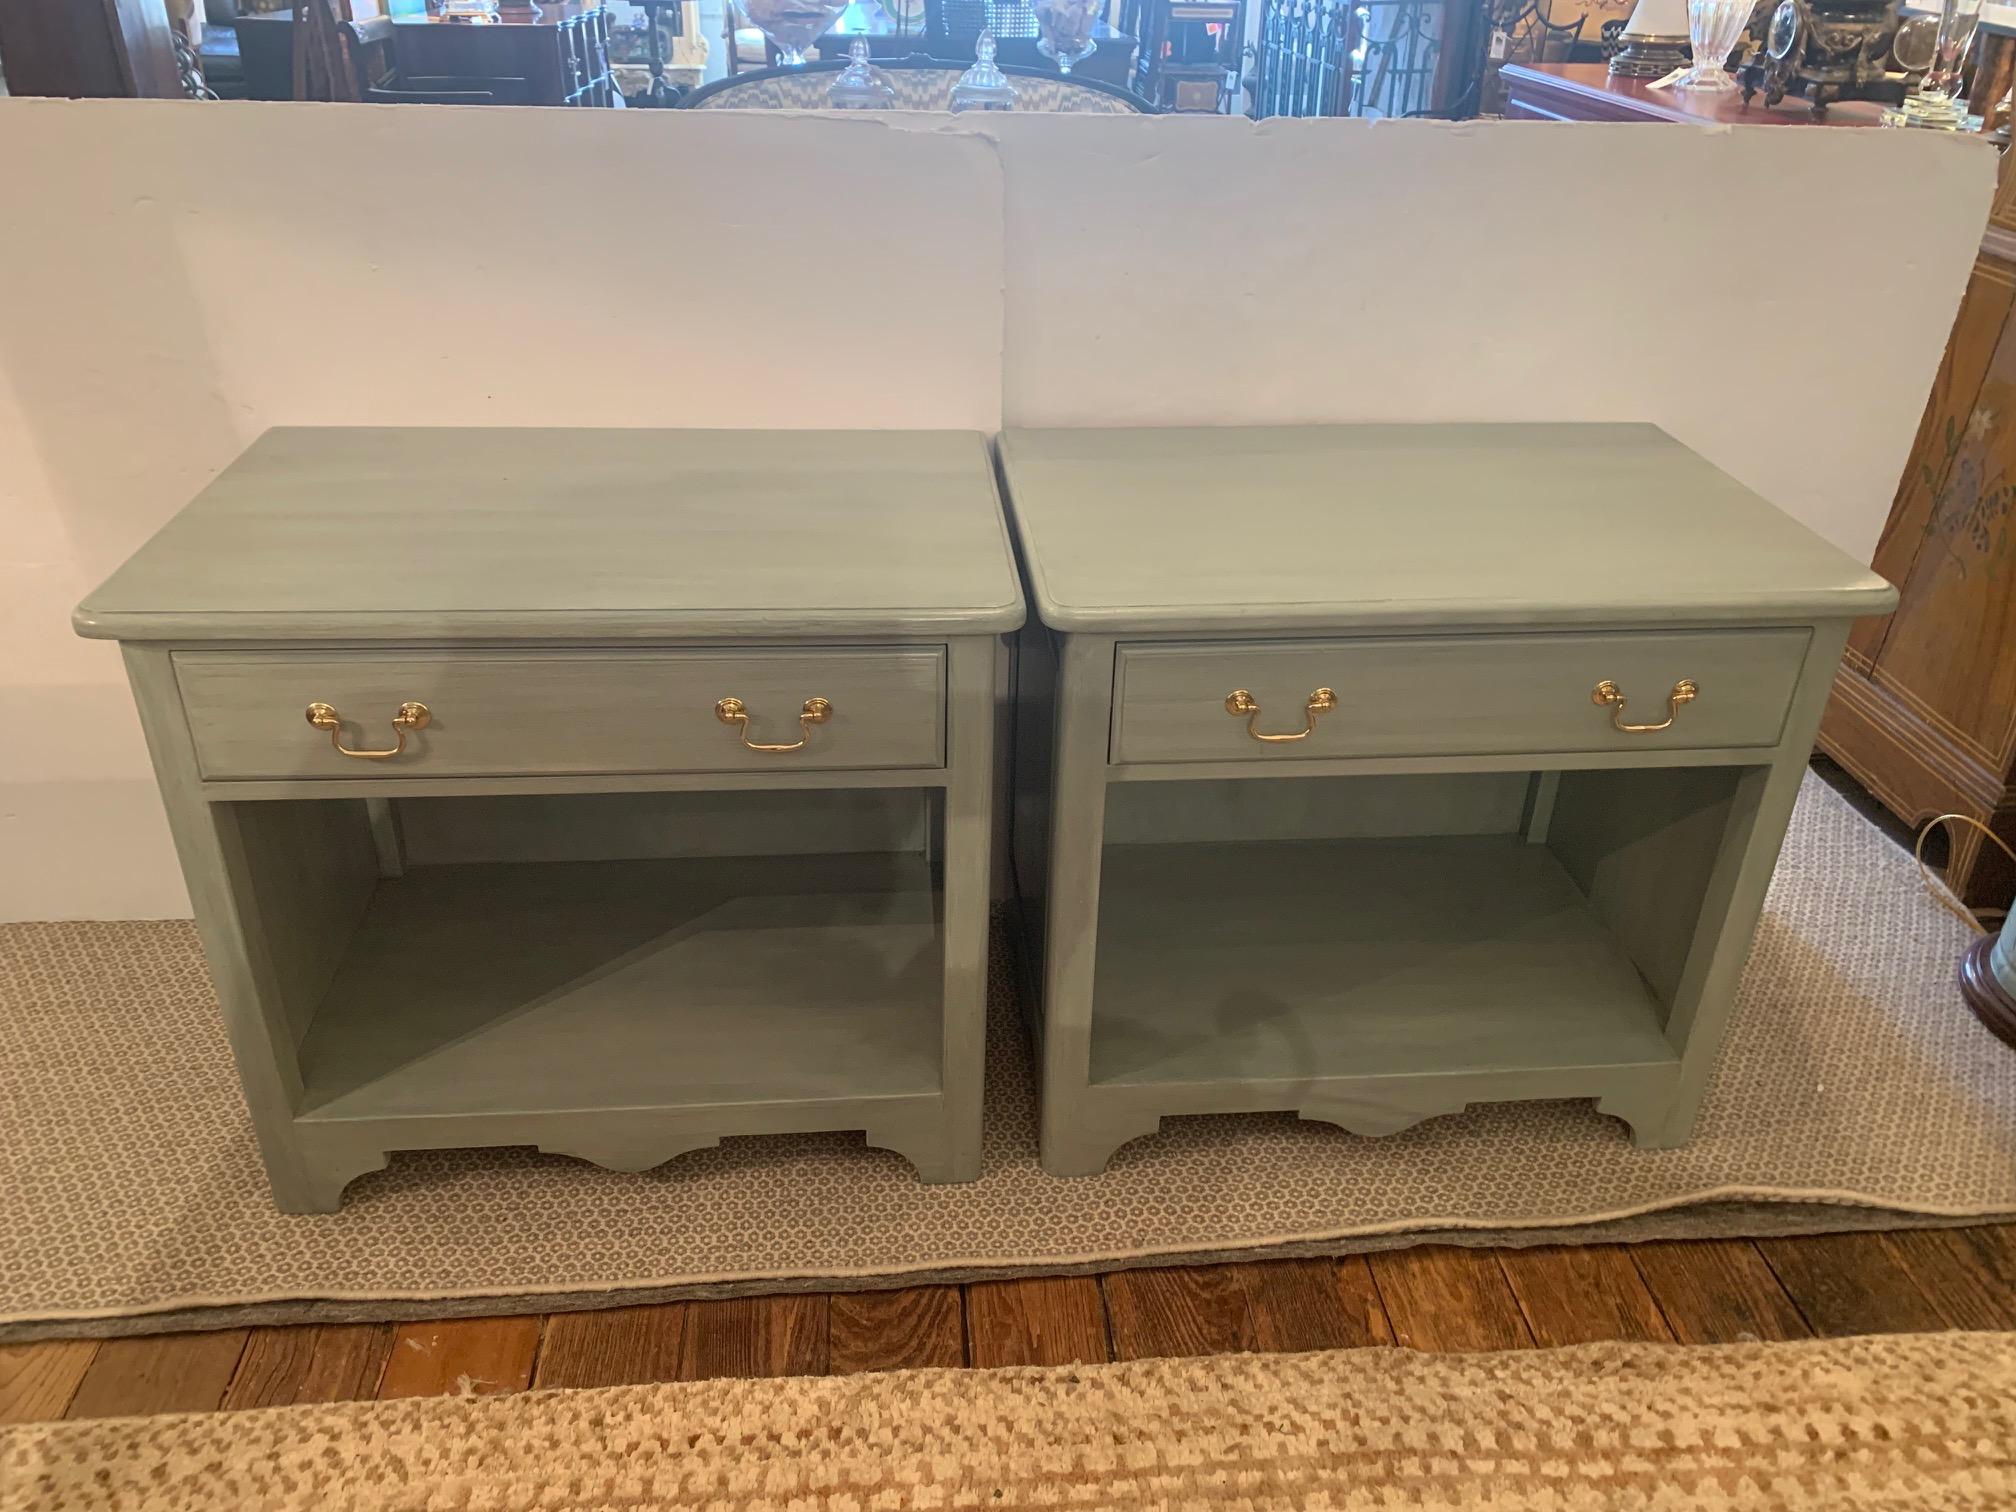 Pair of late 20th century Classic style bedside tables night stands updated and painted in Farrow & Ball's 